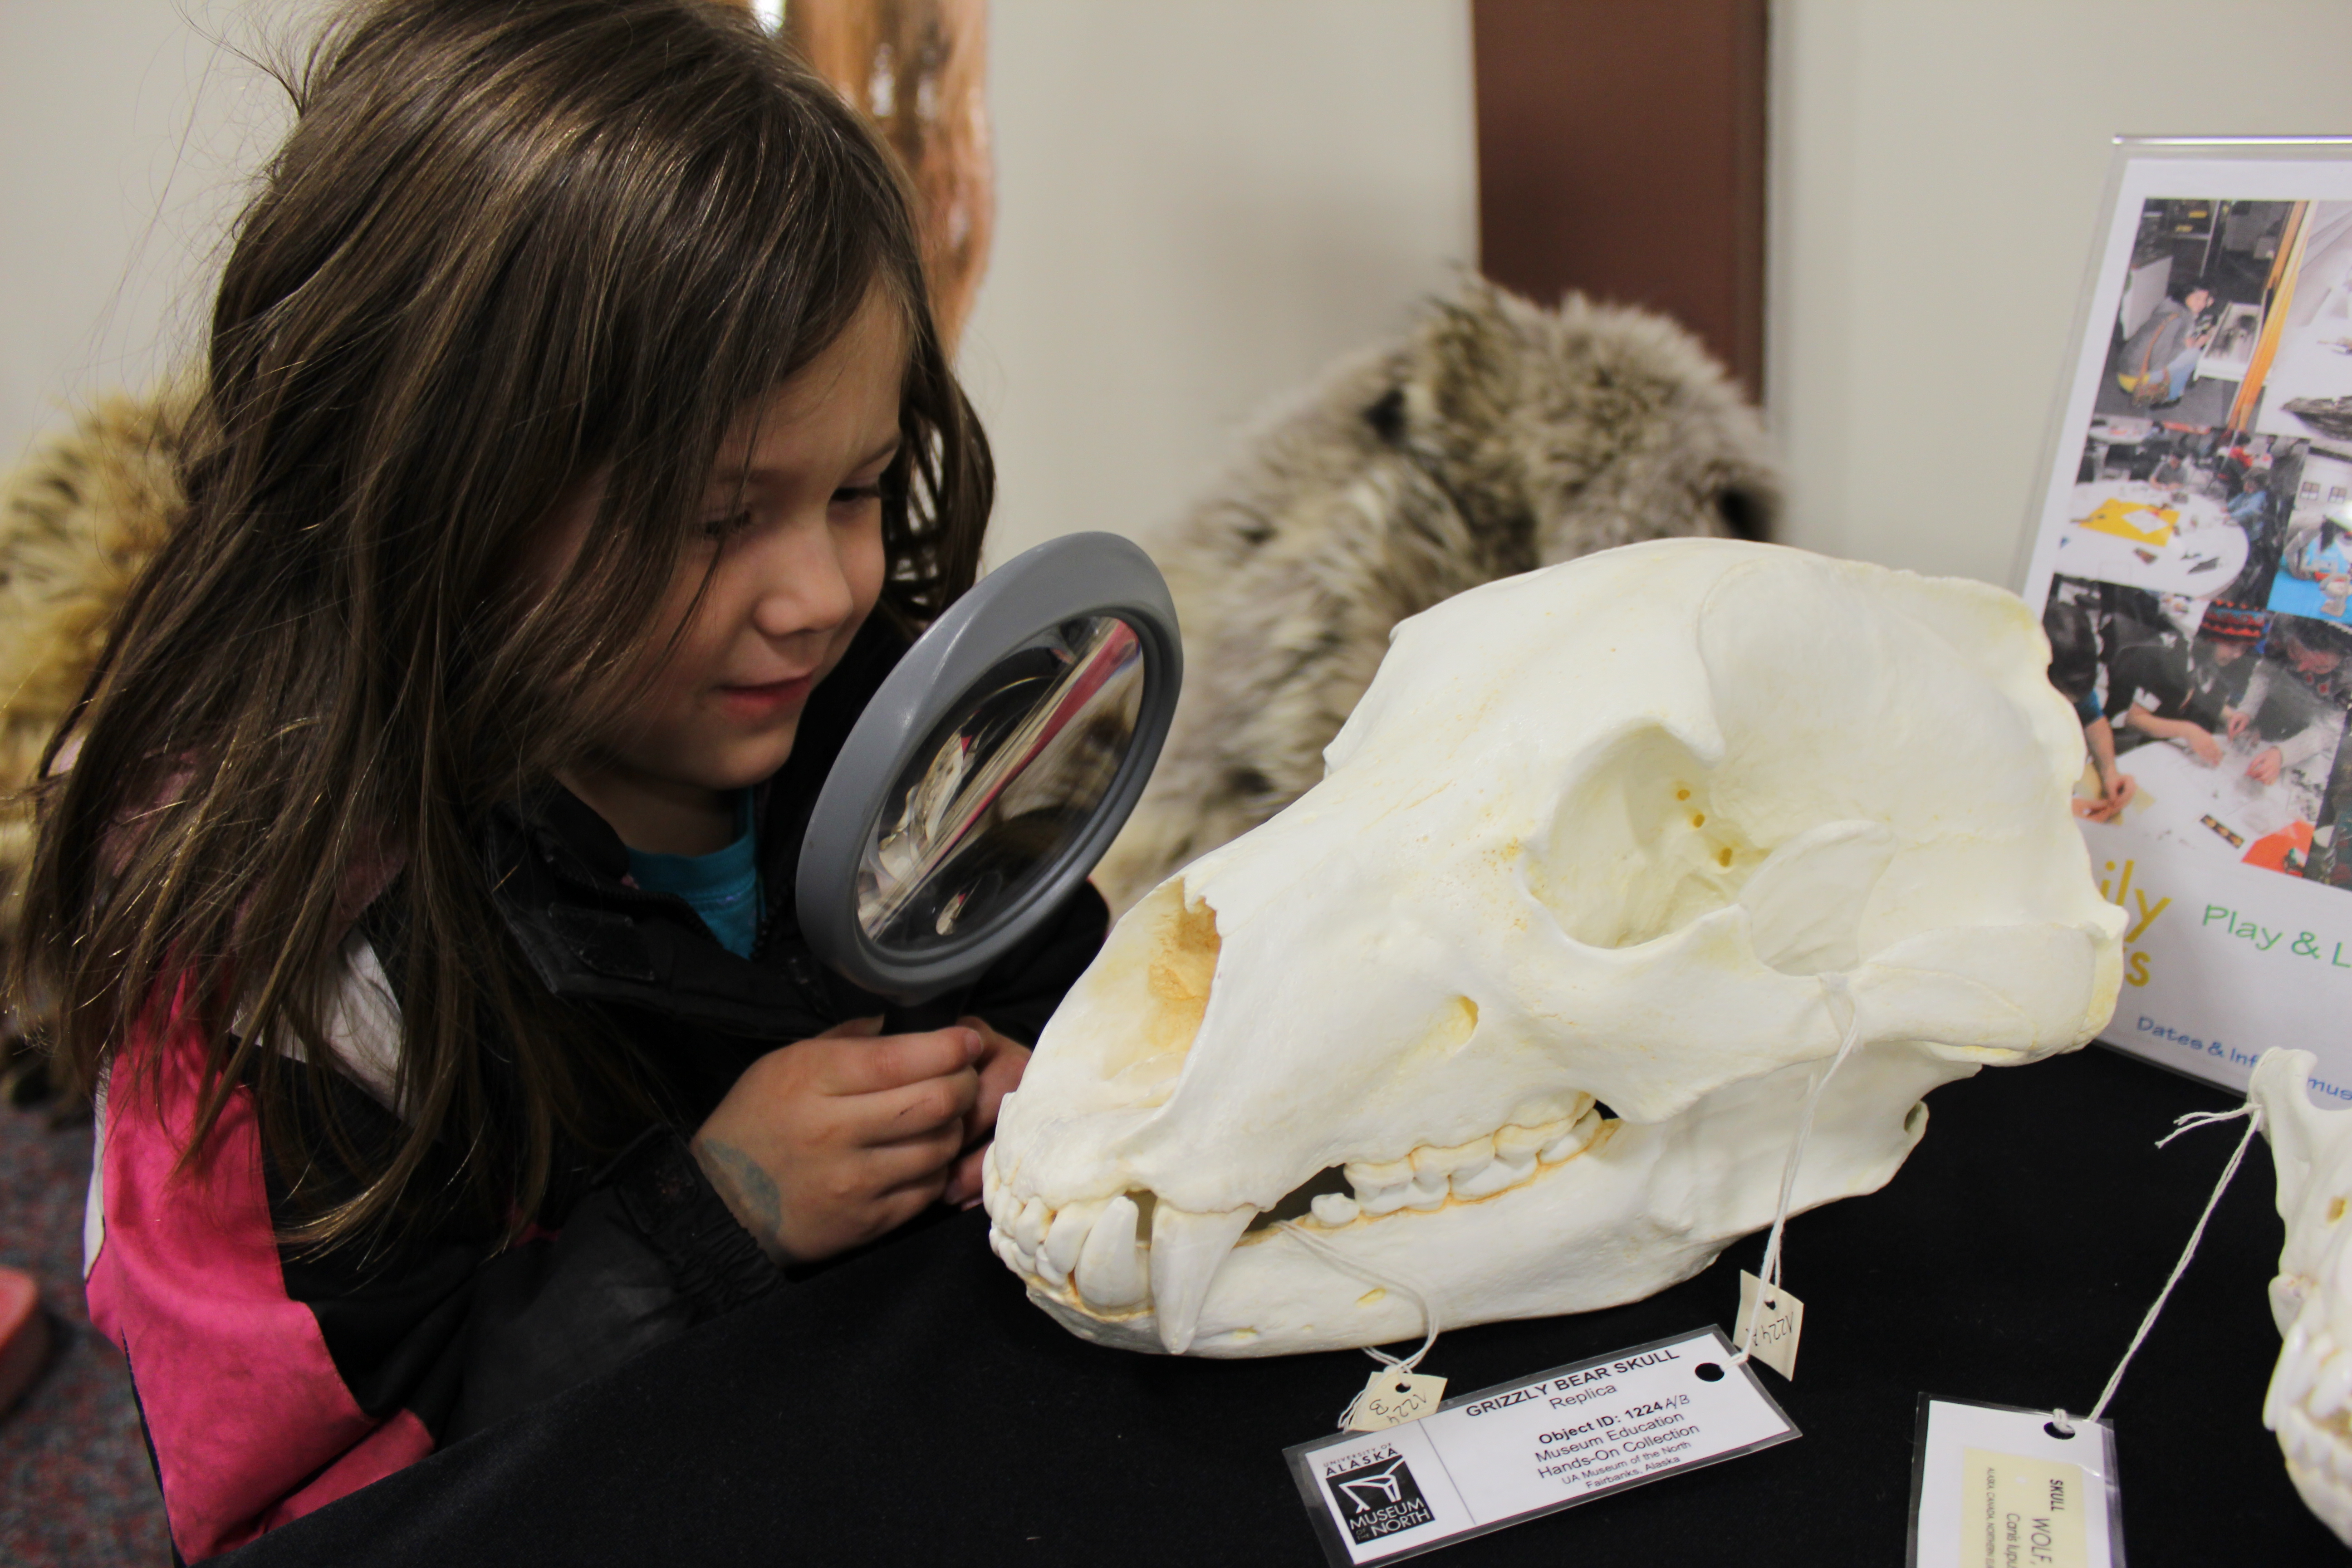 &lt;i&gt;Photo by Peggy Hetman&lt;/i&gt;&lt;br&gt;After-school volunteers can help bring museum specimens to local kids at the University of Alaska Museum of the North.